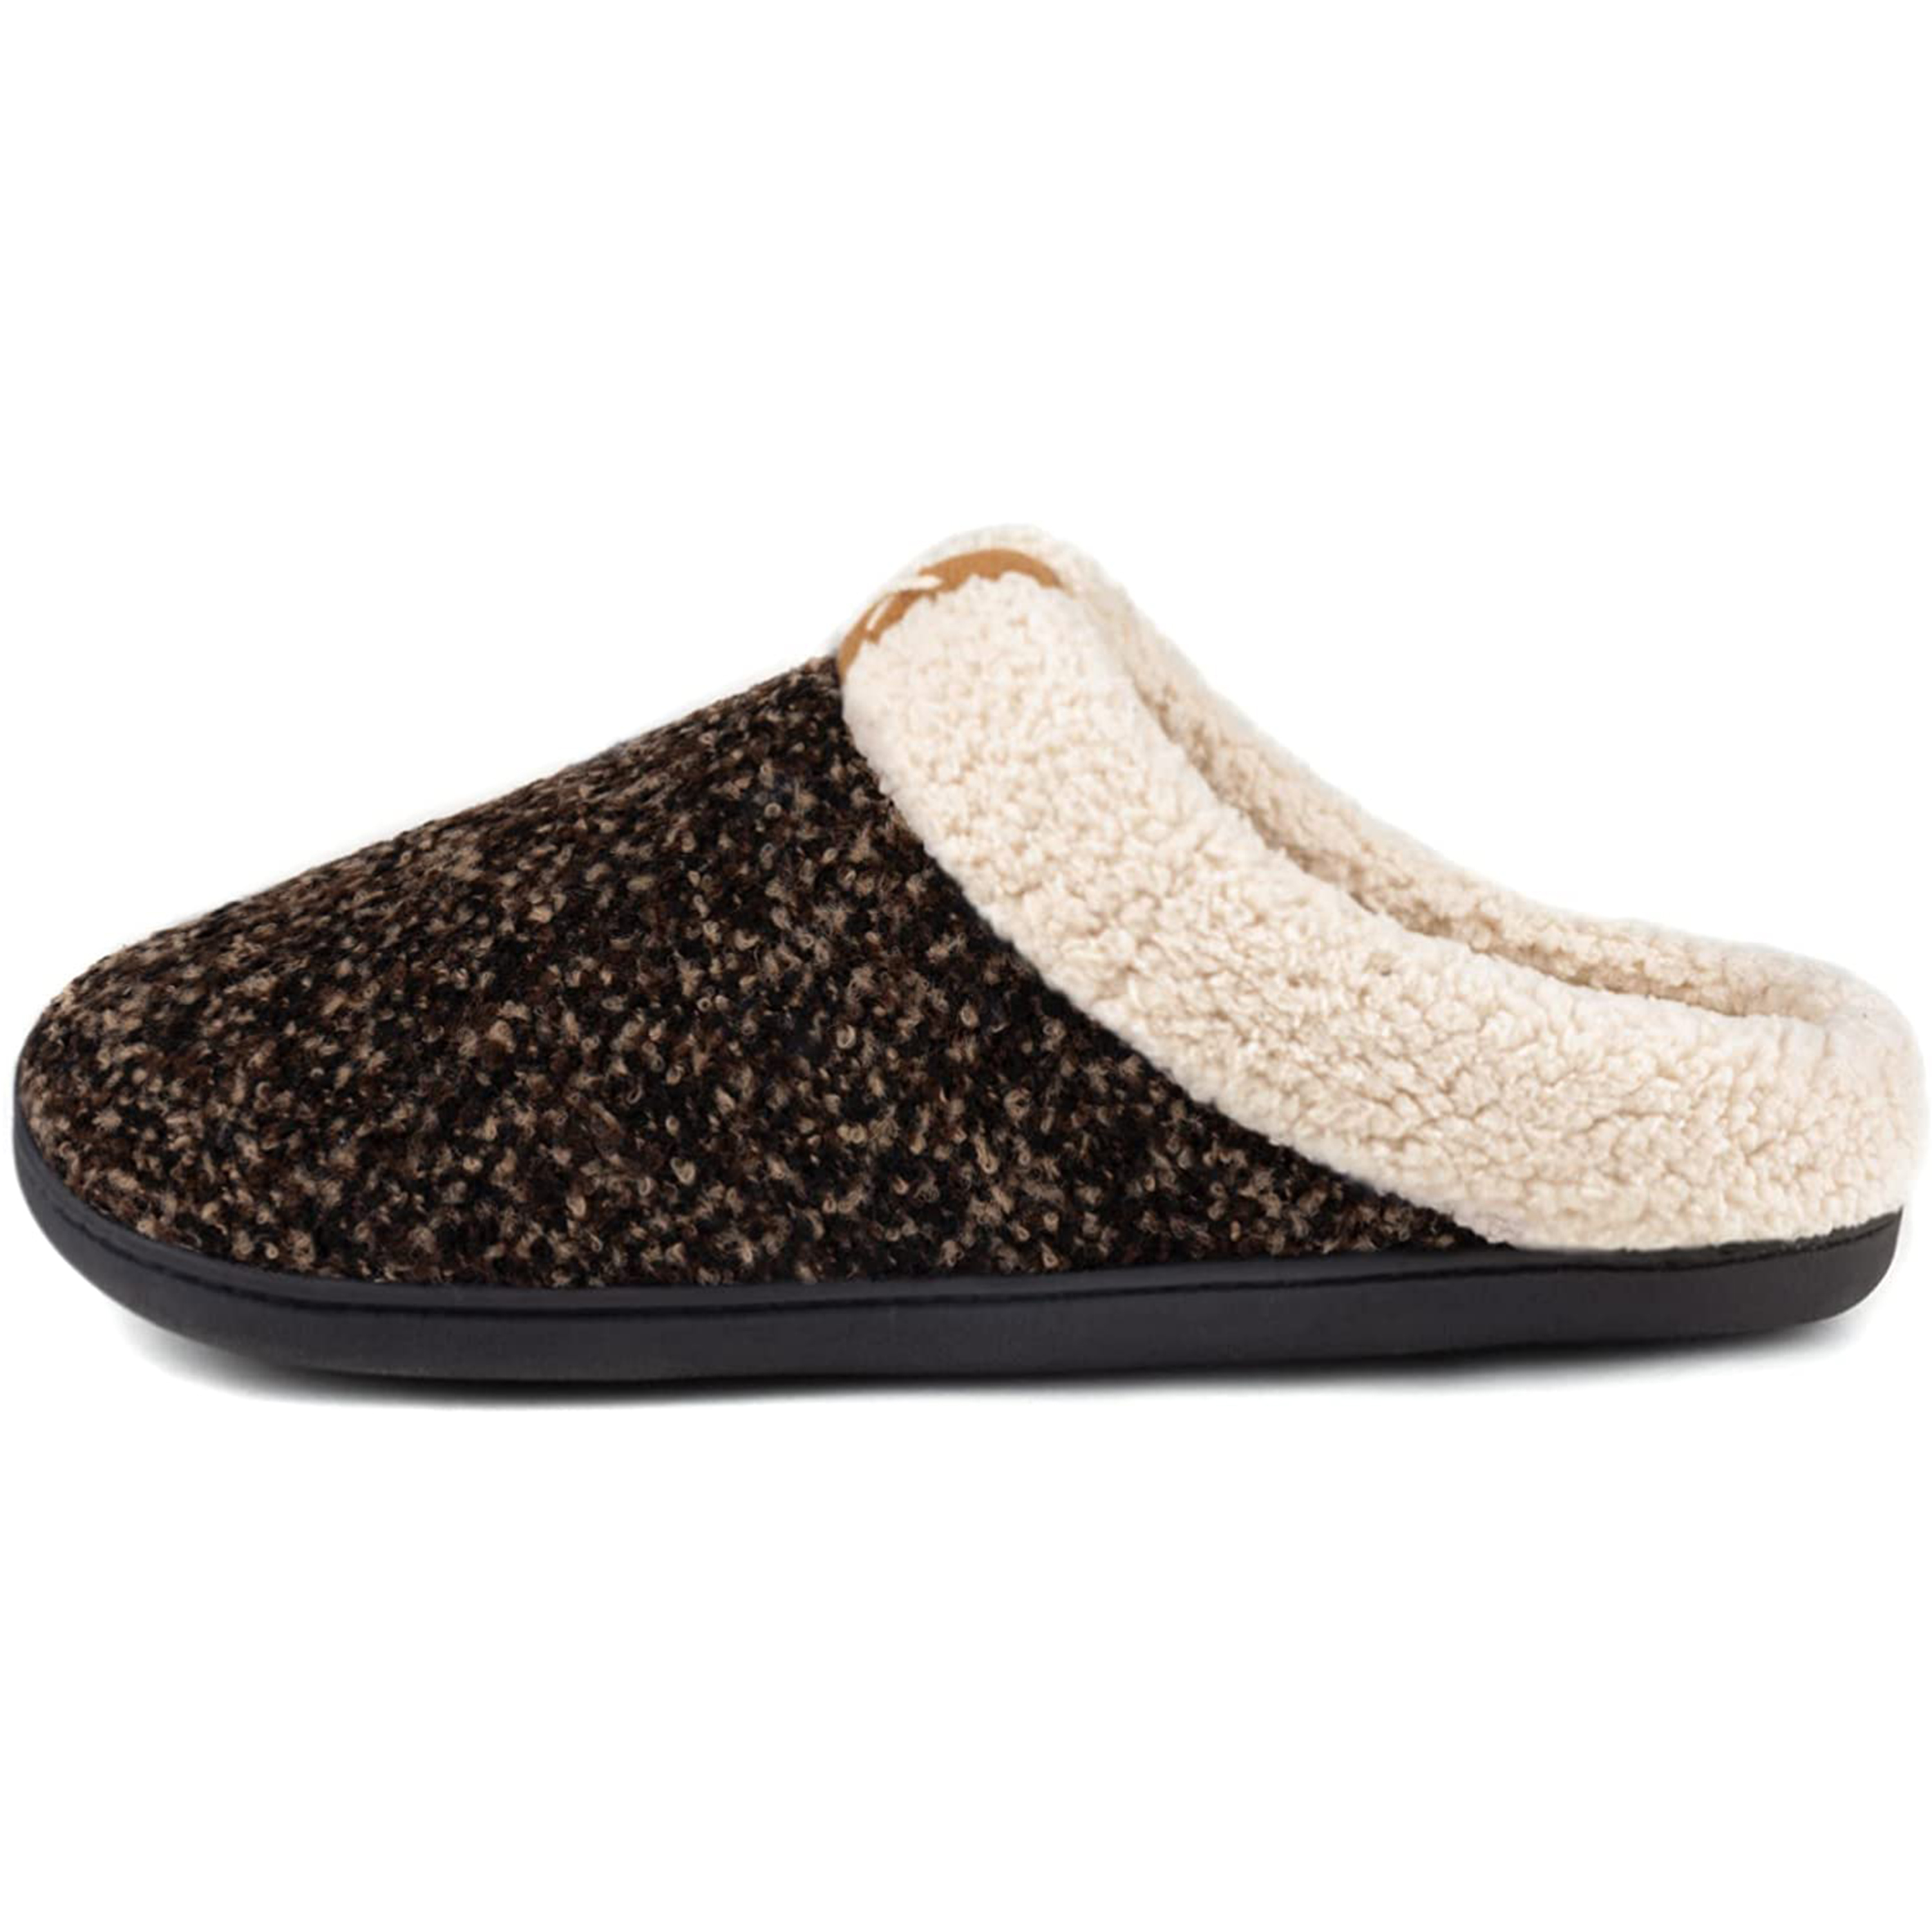 Men's Cozy Memory Foam Slippers with Fuzzy Plush Wool-Like Lining, Slip on Clog House Shoes with Indoor Outdoor Anti-Skid Rubber Sole - image 3 of 5